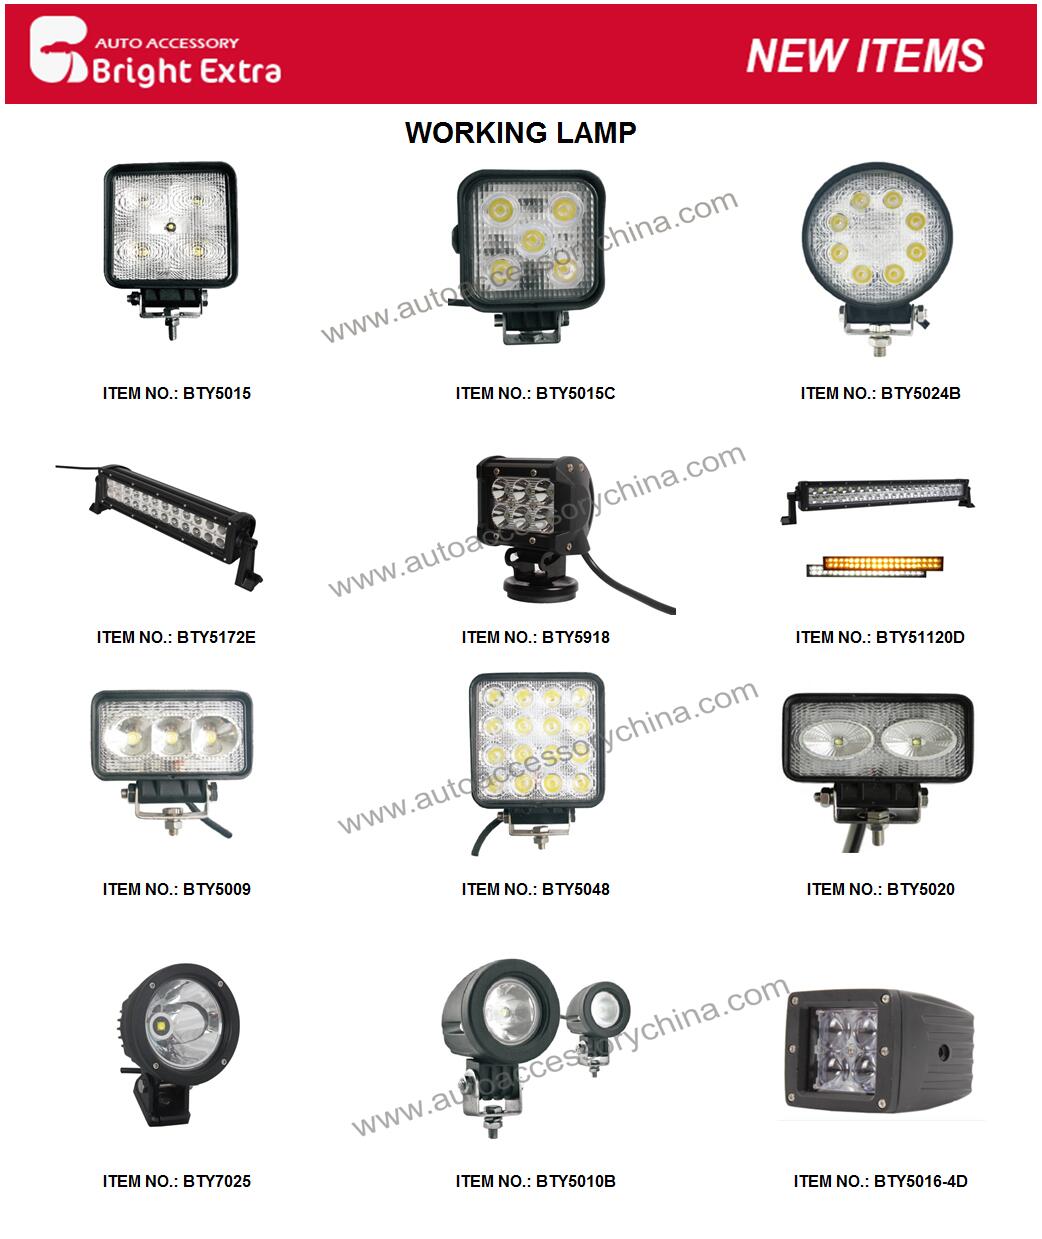 LED WORKING LAMPS